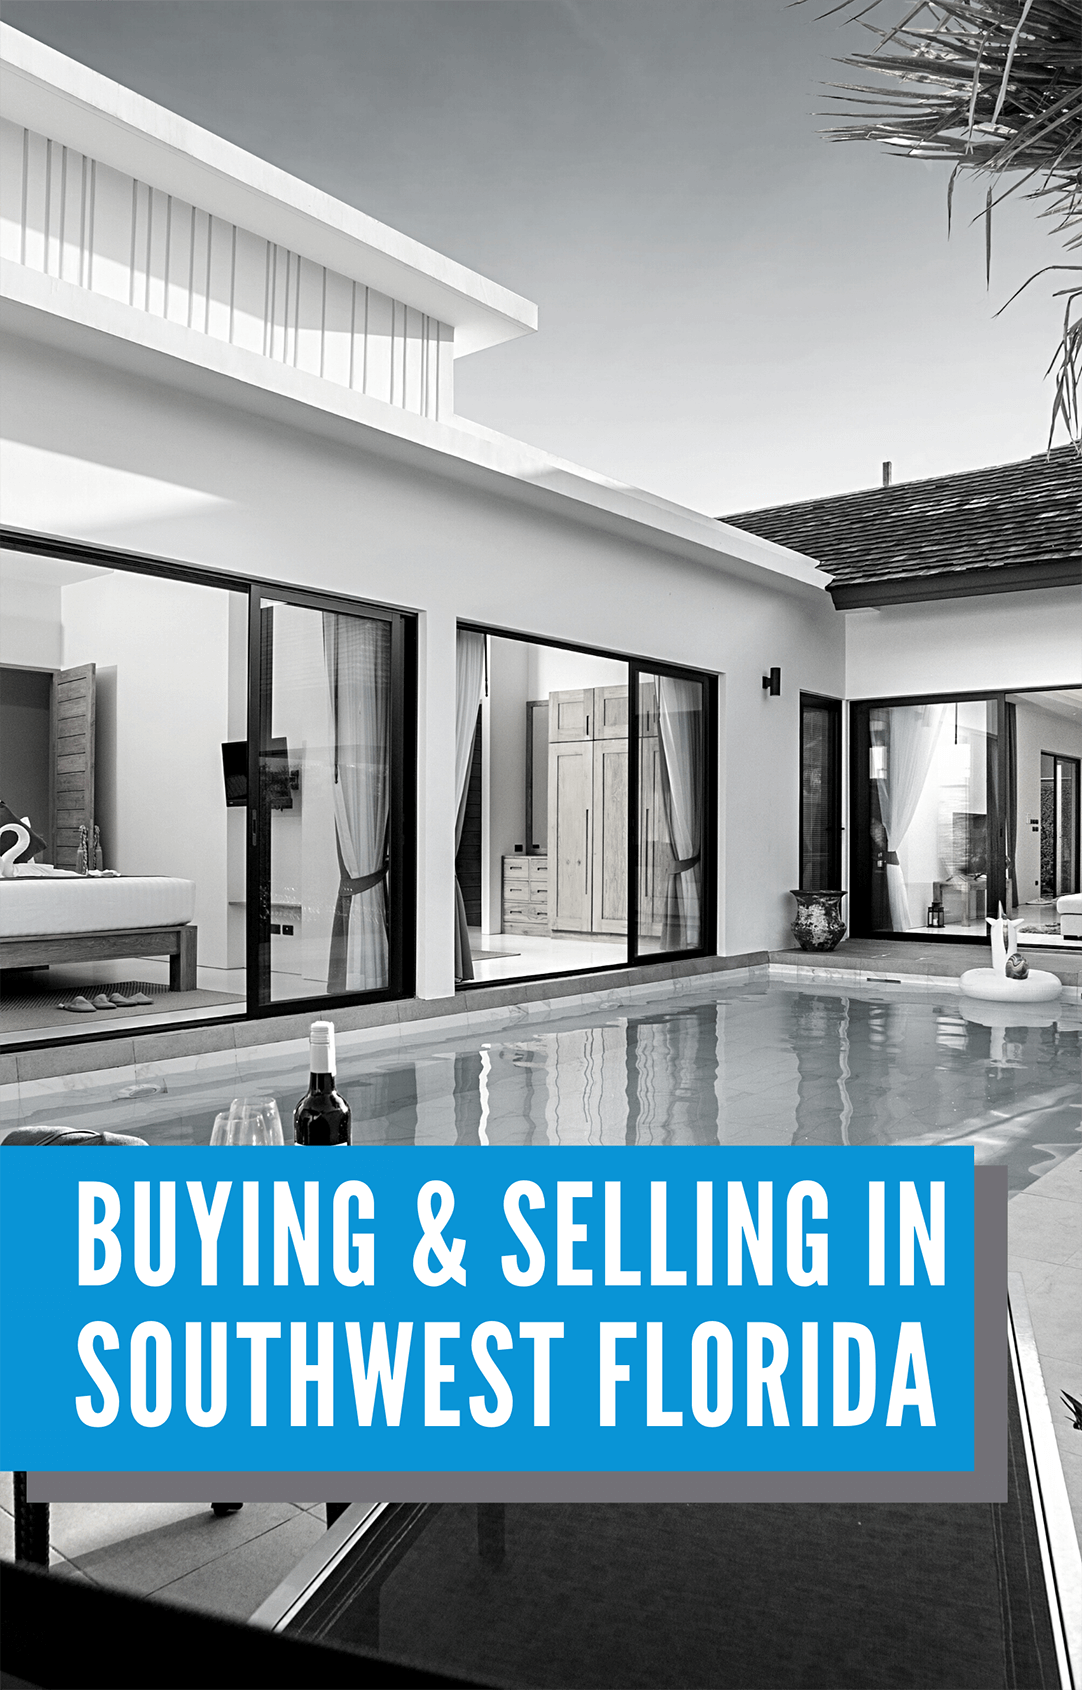 Buying & Selling in SWFL by Sonja Pound